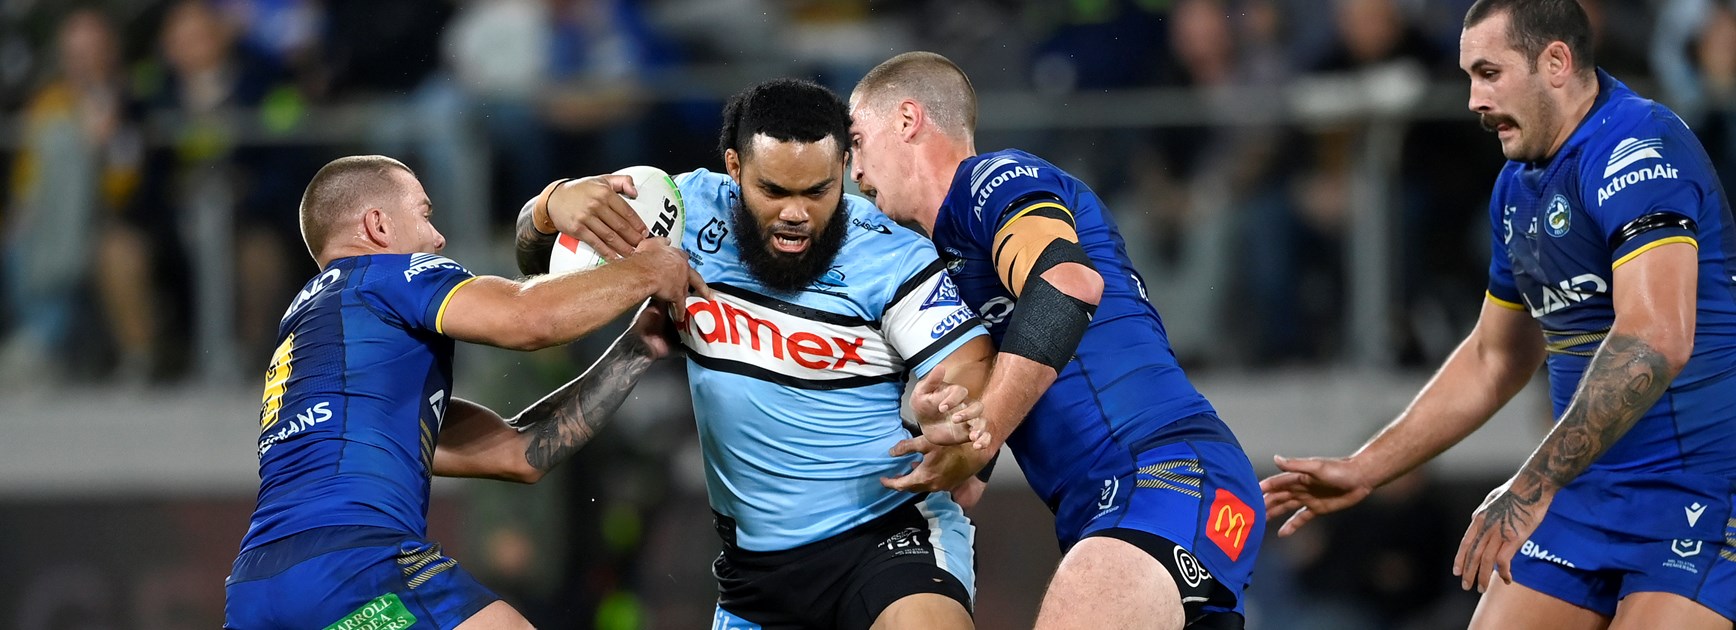 Comeback kings: Parra power past Sharks as stars return in style